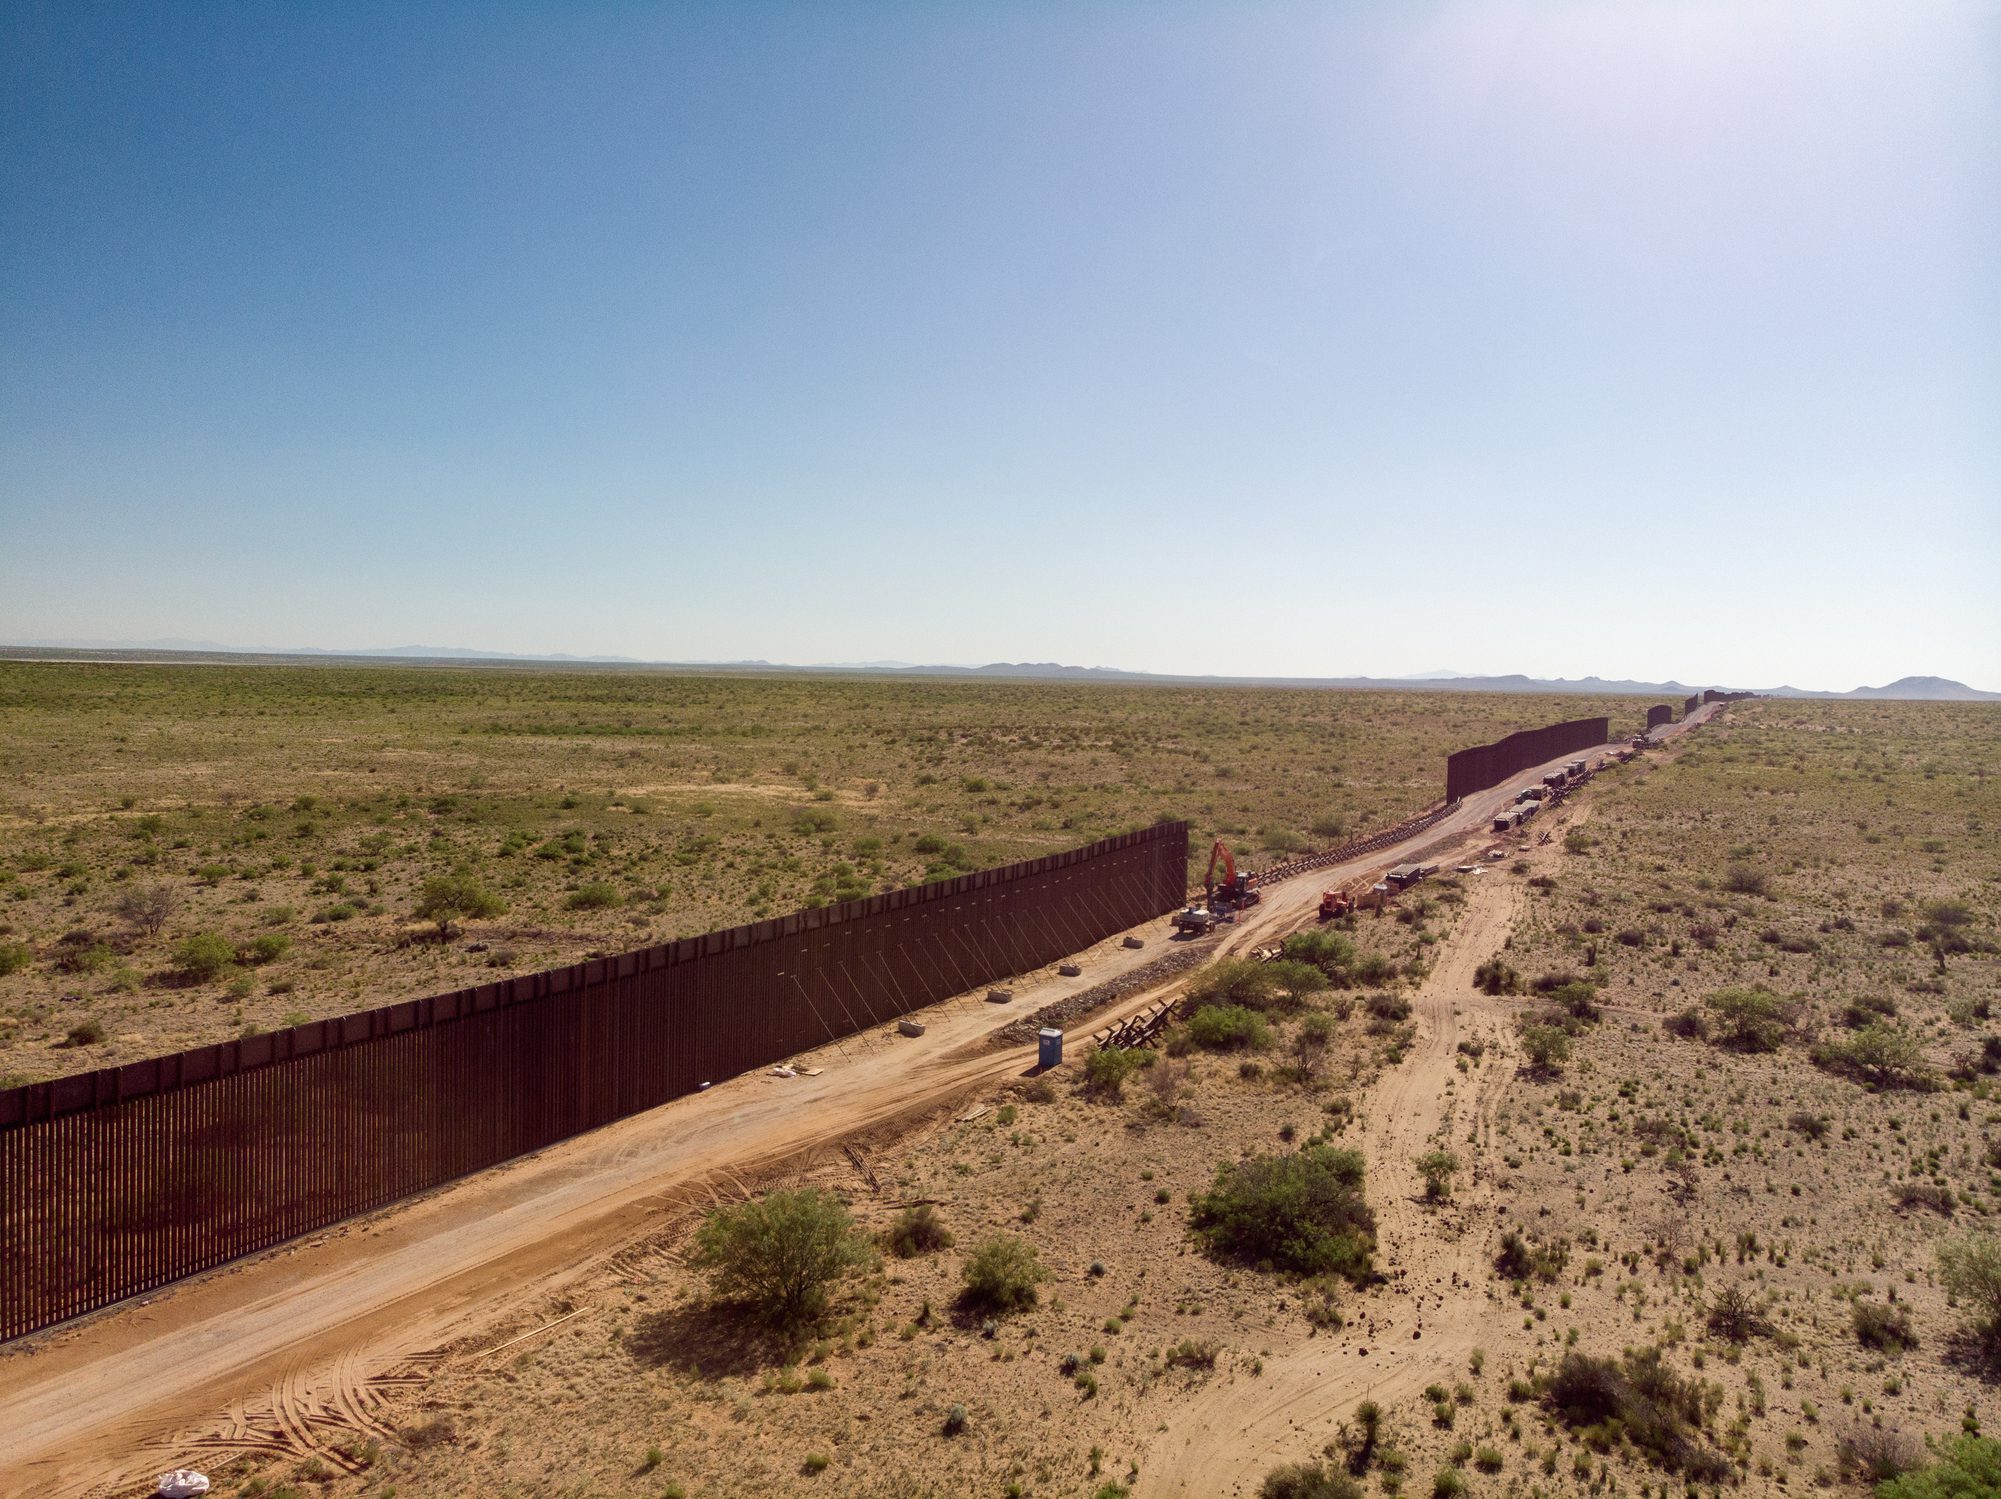 An Aerial View Of The International Border Wall With Portions Still Under Construction